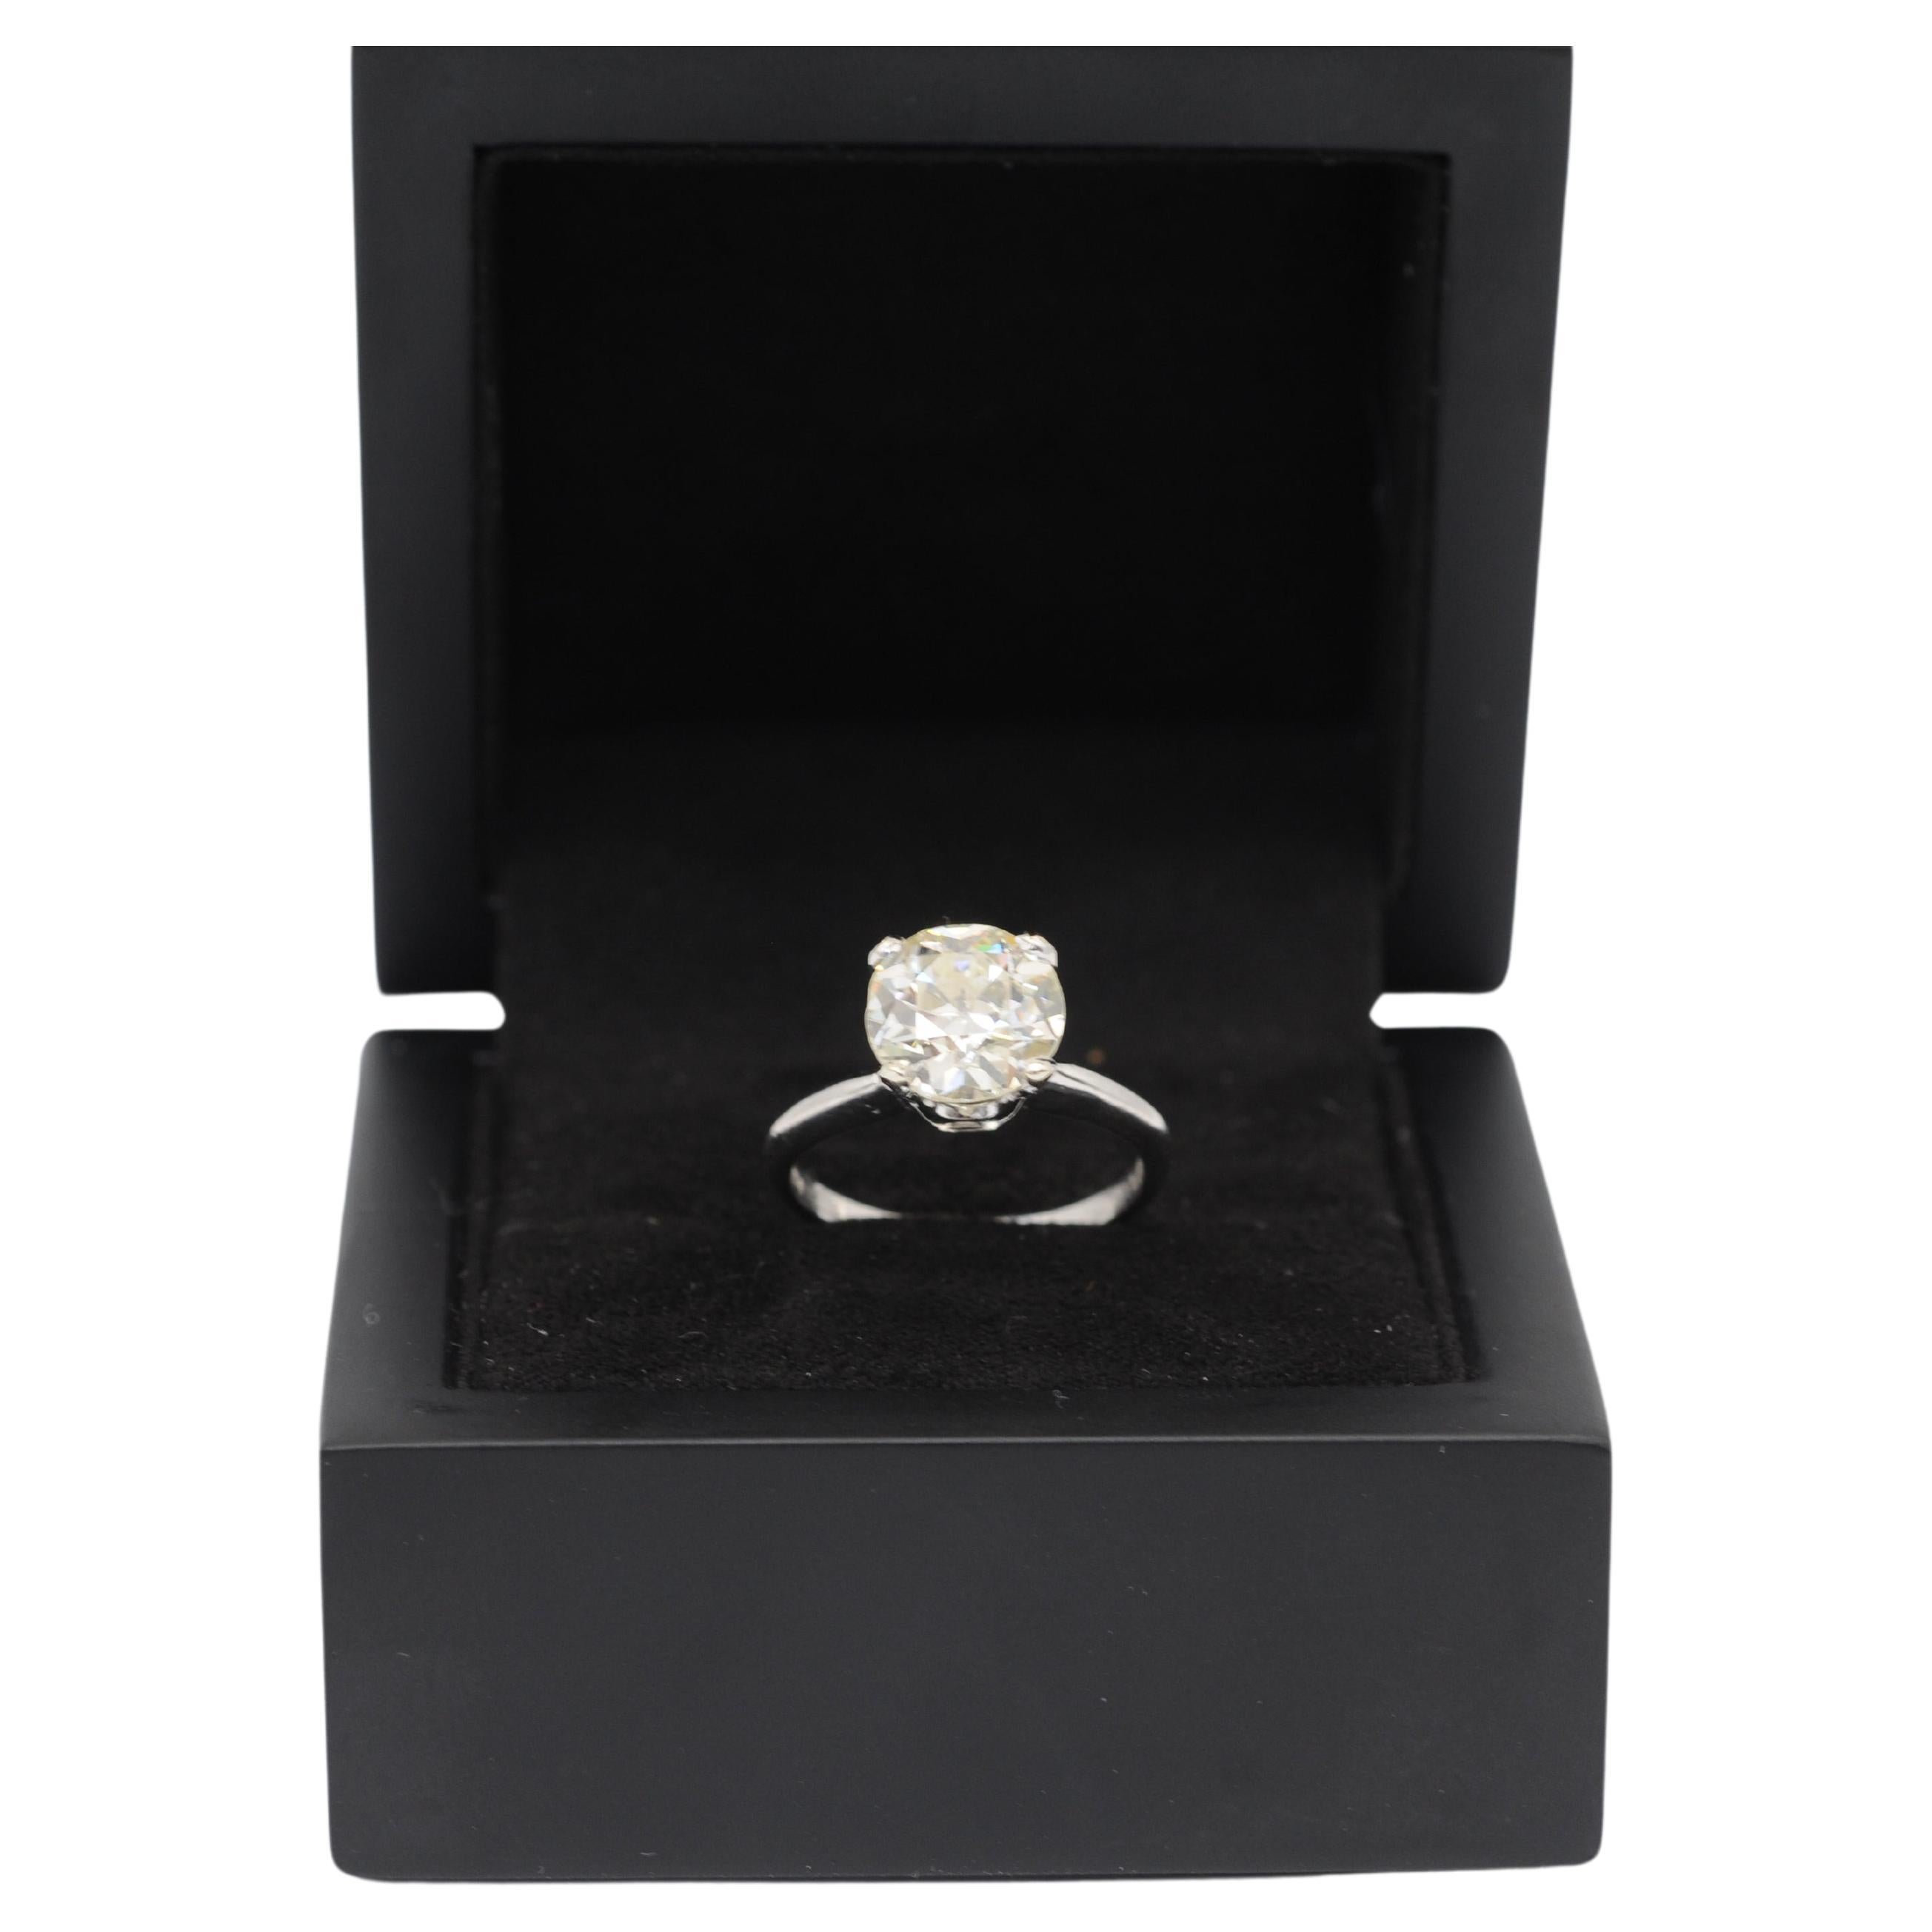 
Indulge in the breathtaking beauty of this exquisite Old European solitaire ring, meticulously set in palladium. A true showstopper and a dazzling statement piece, this ring boasts a stunning diamond with the following attributes:

Gemstone